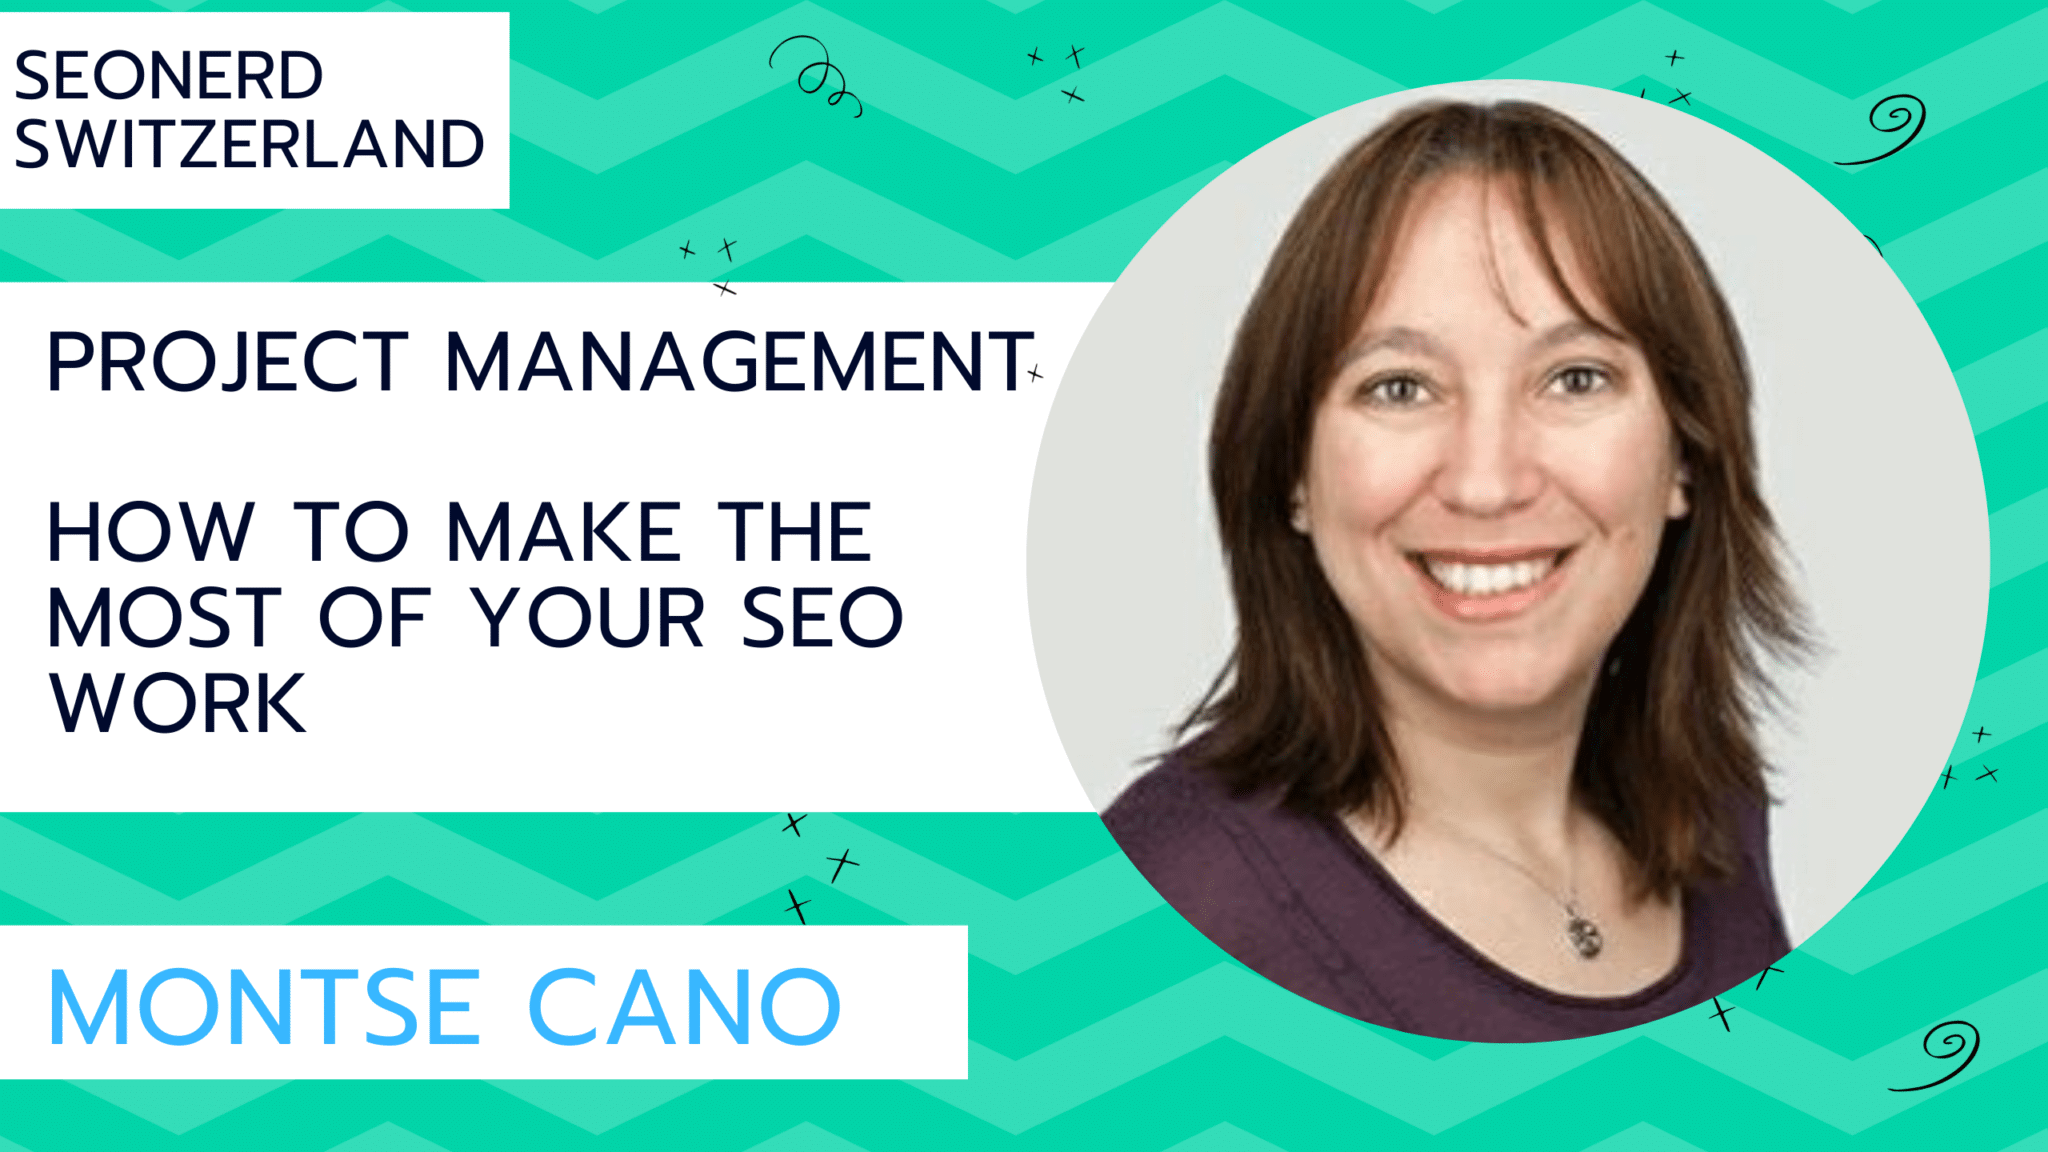 Montse Cano discusses project management for SEO at SEOnerdSwitzerland.